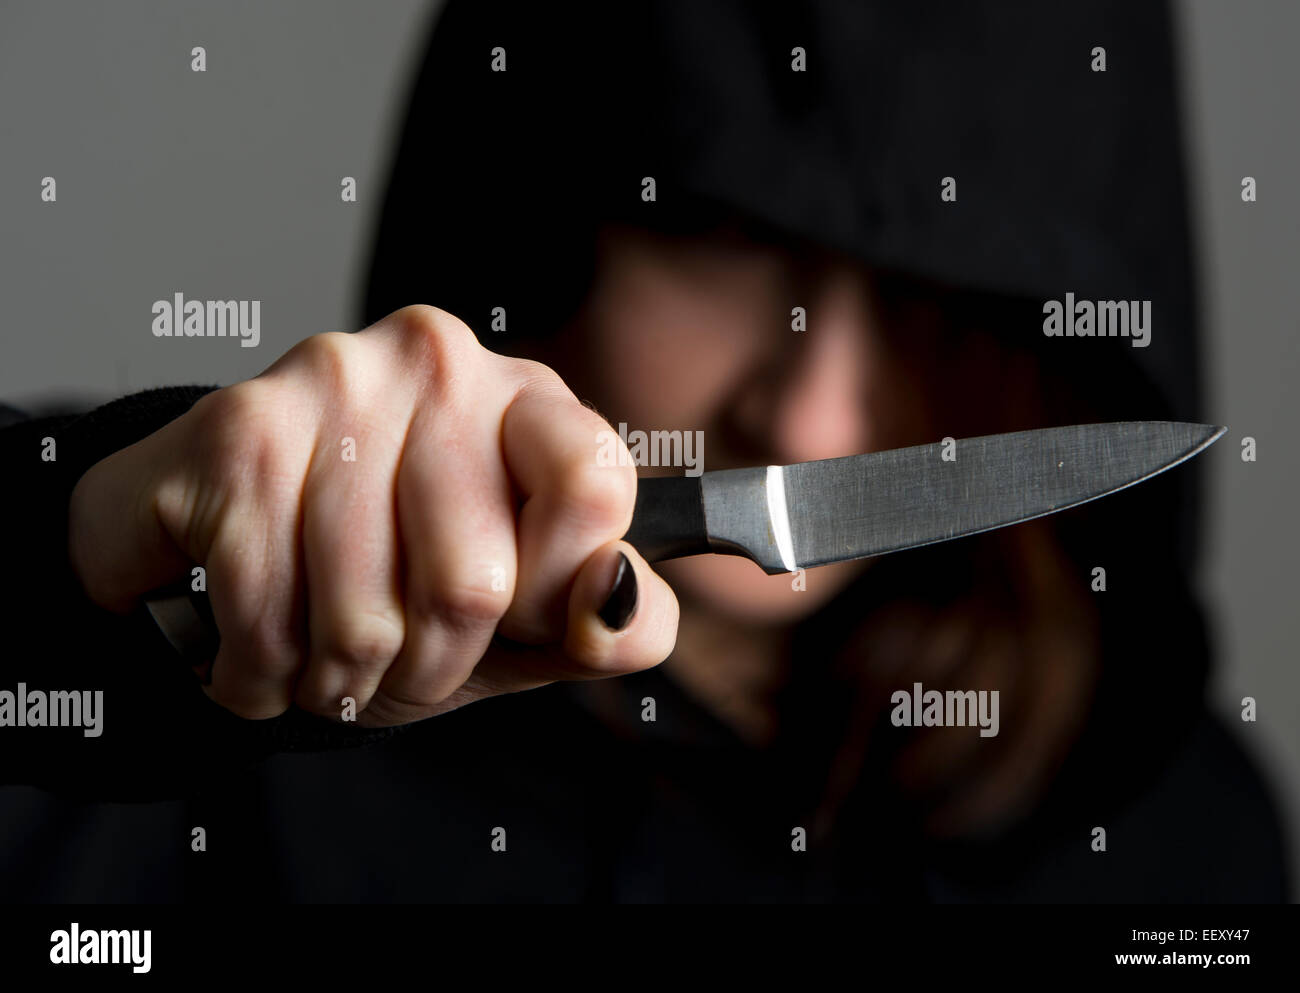 Female wearing a hooded top or 'hoodie' brandishing a knife symbolizing gang culture. Stock Photo